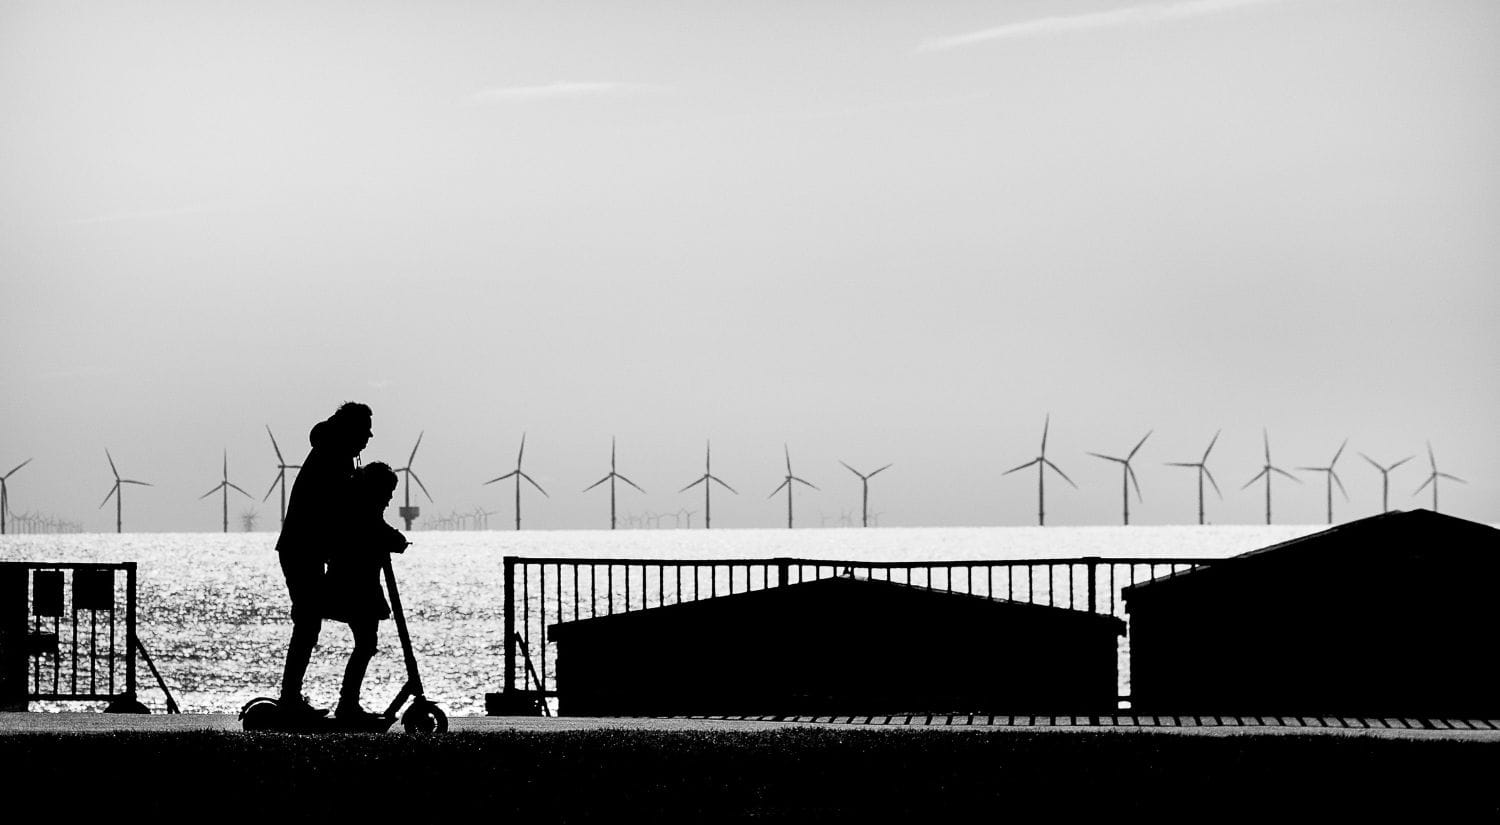 Untitled landscape with wind turbines by Dan Sceats